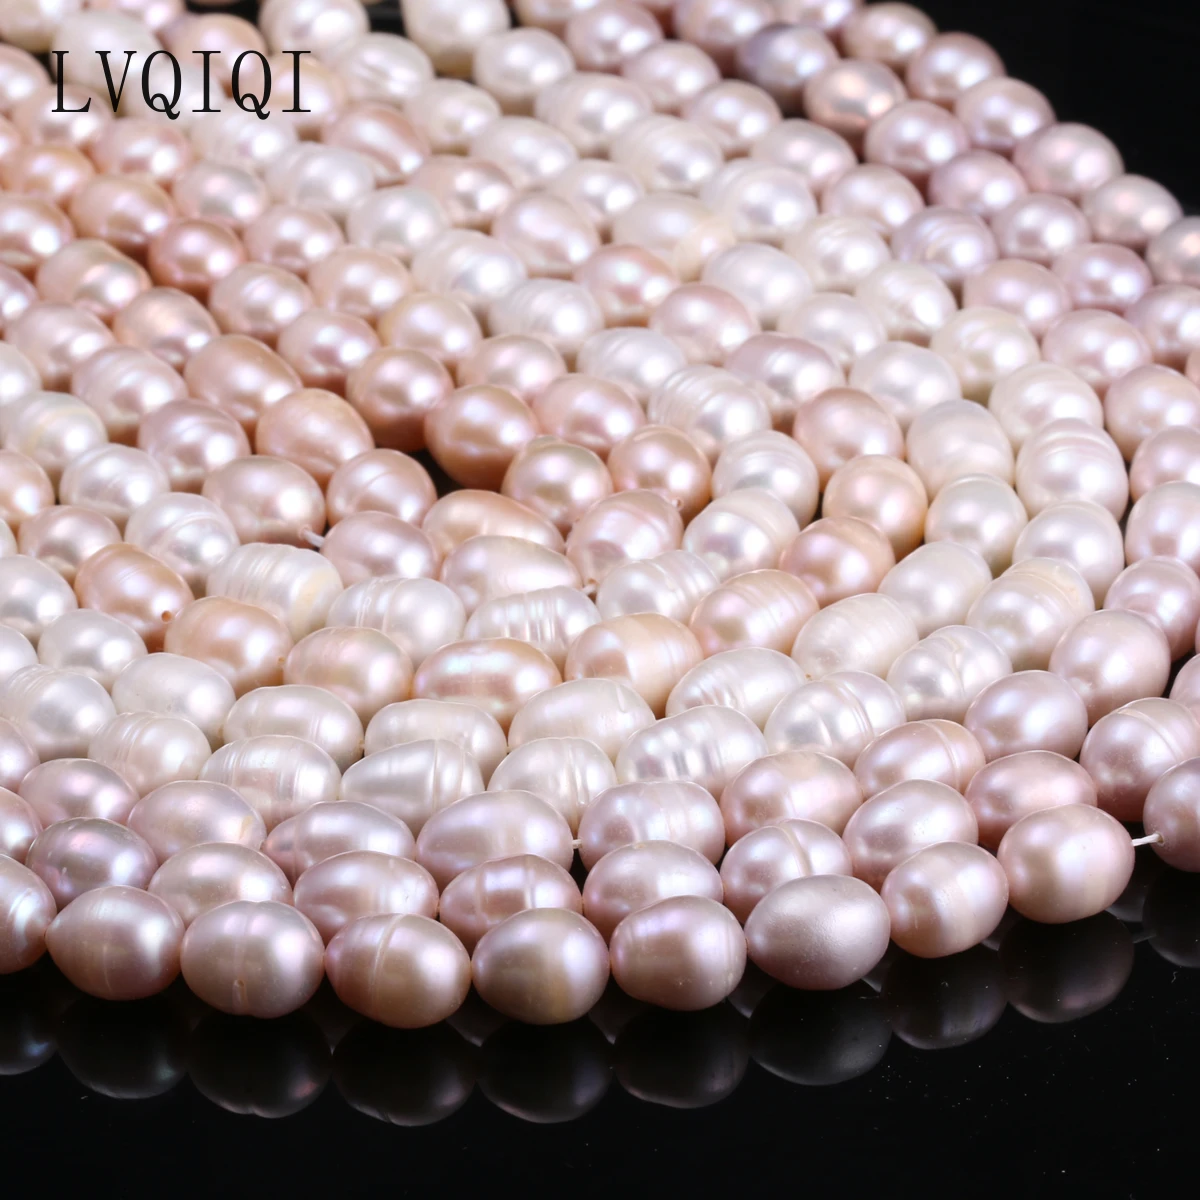 

LVQIQI Natural Freshwater Cultured Pearls Beads Rice Shape 100%Natural Pearls for Jewelry Making DIY Strand 13 Inches Size 8-9mm